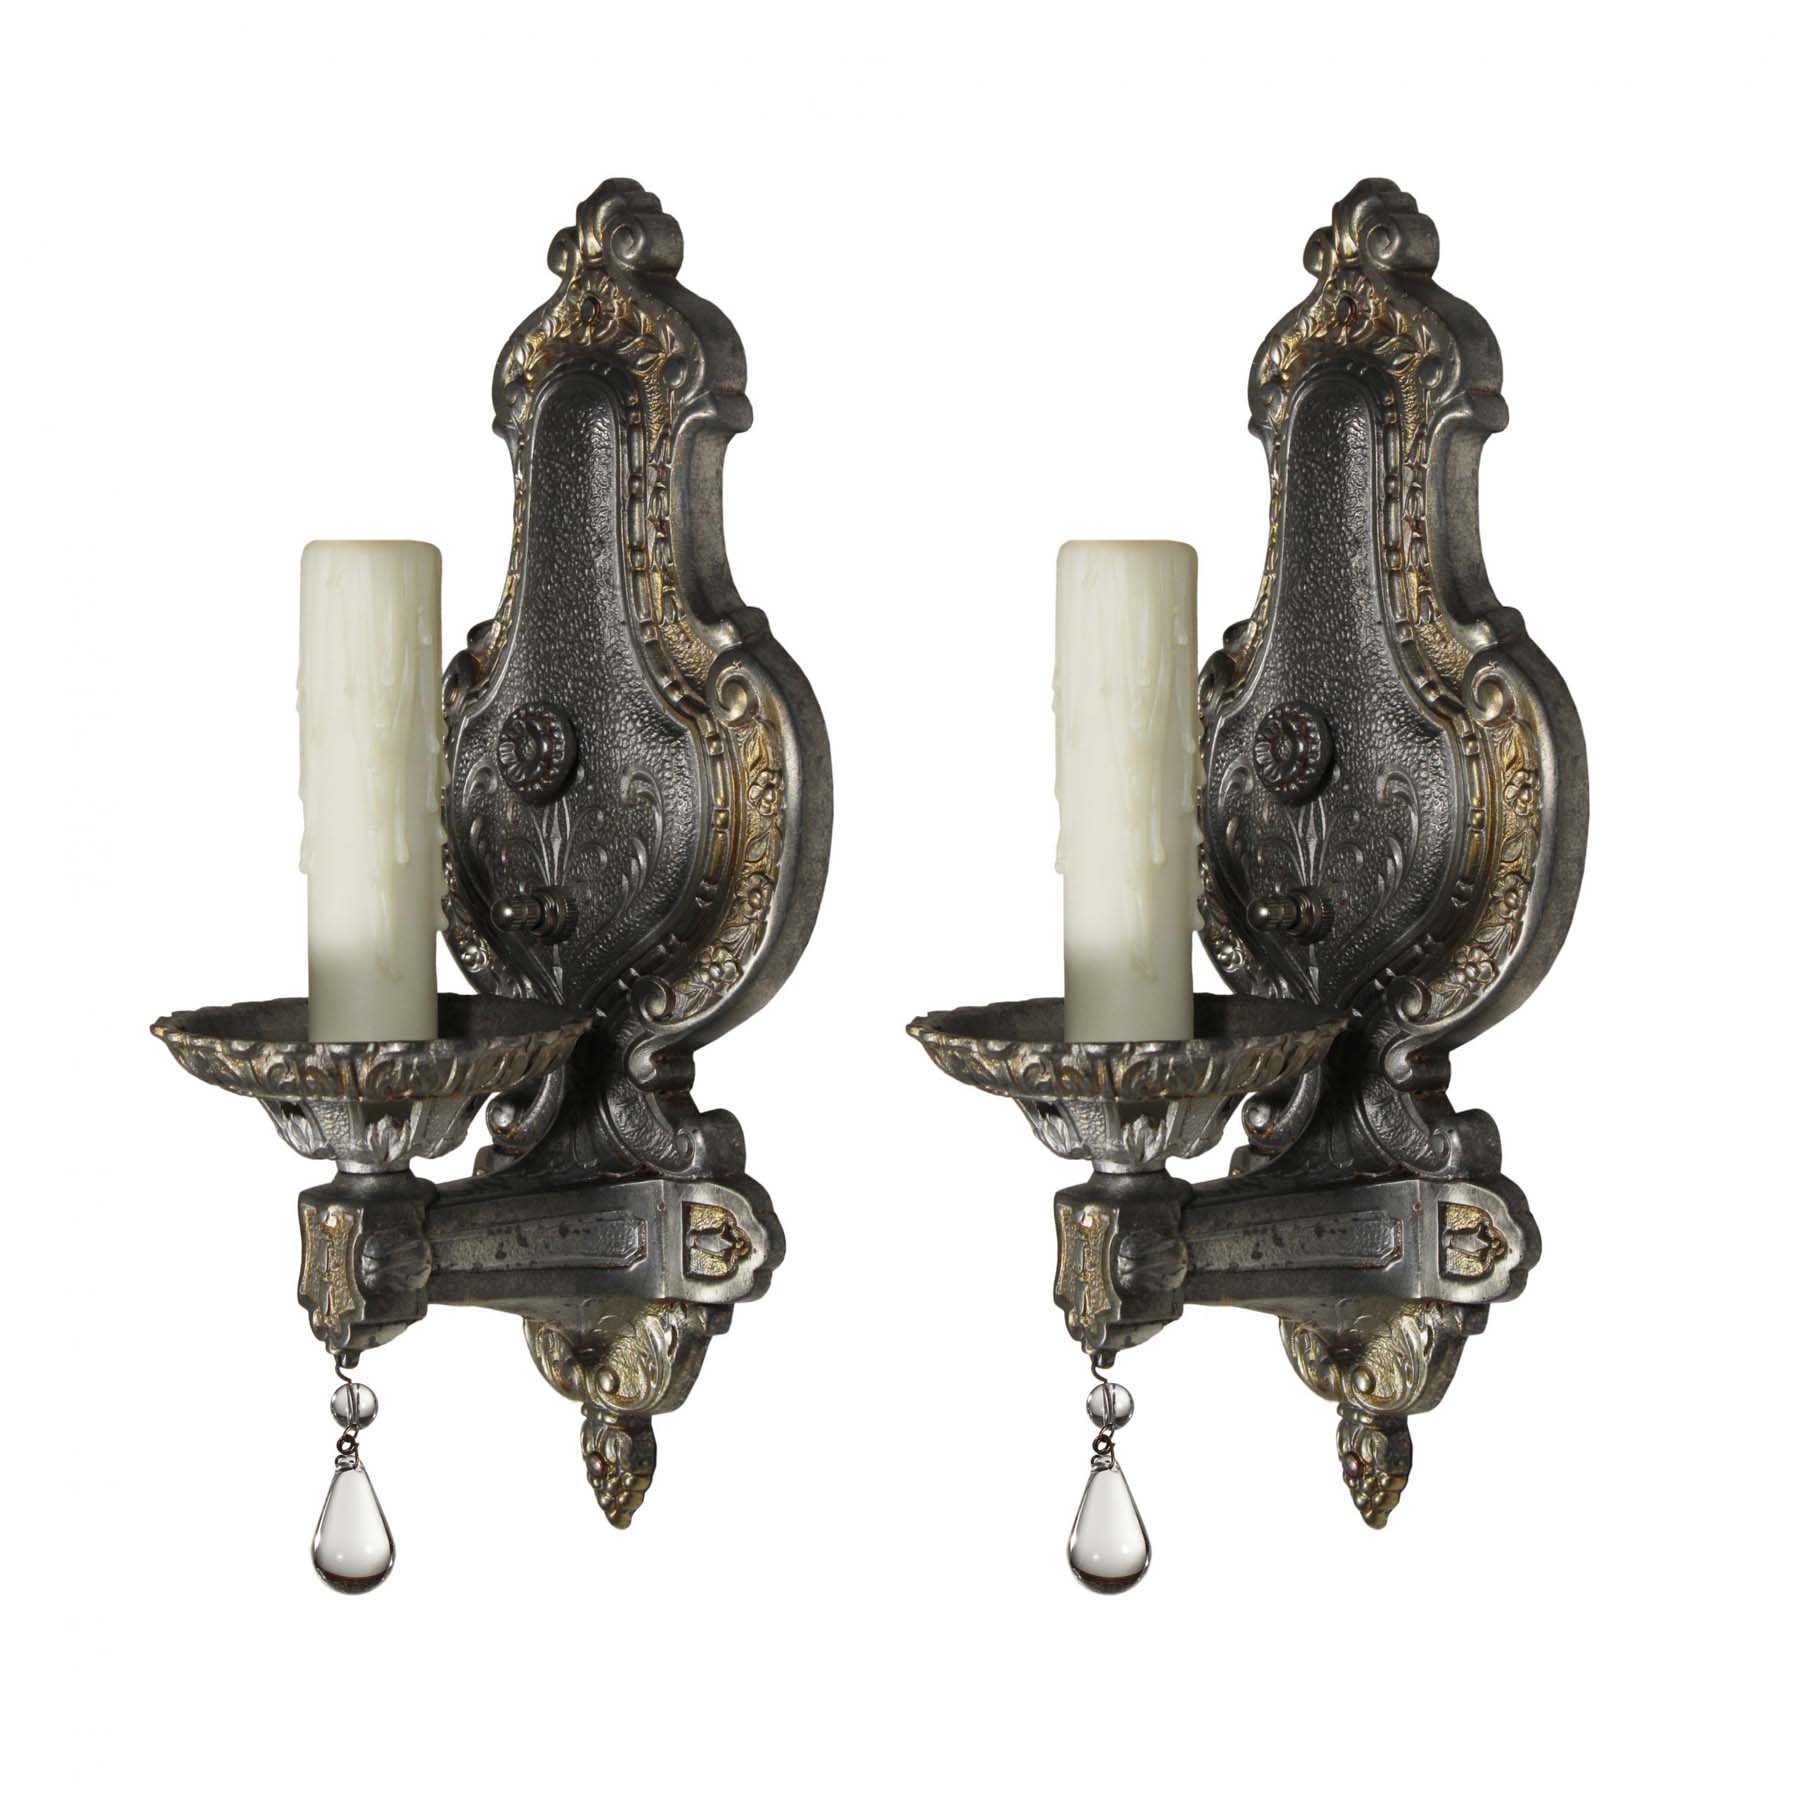 Antique Neoclassical Sconce Pair, Signed Champion Lighting-0